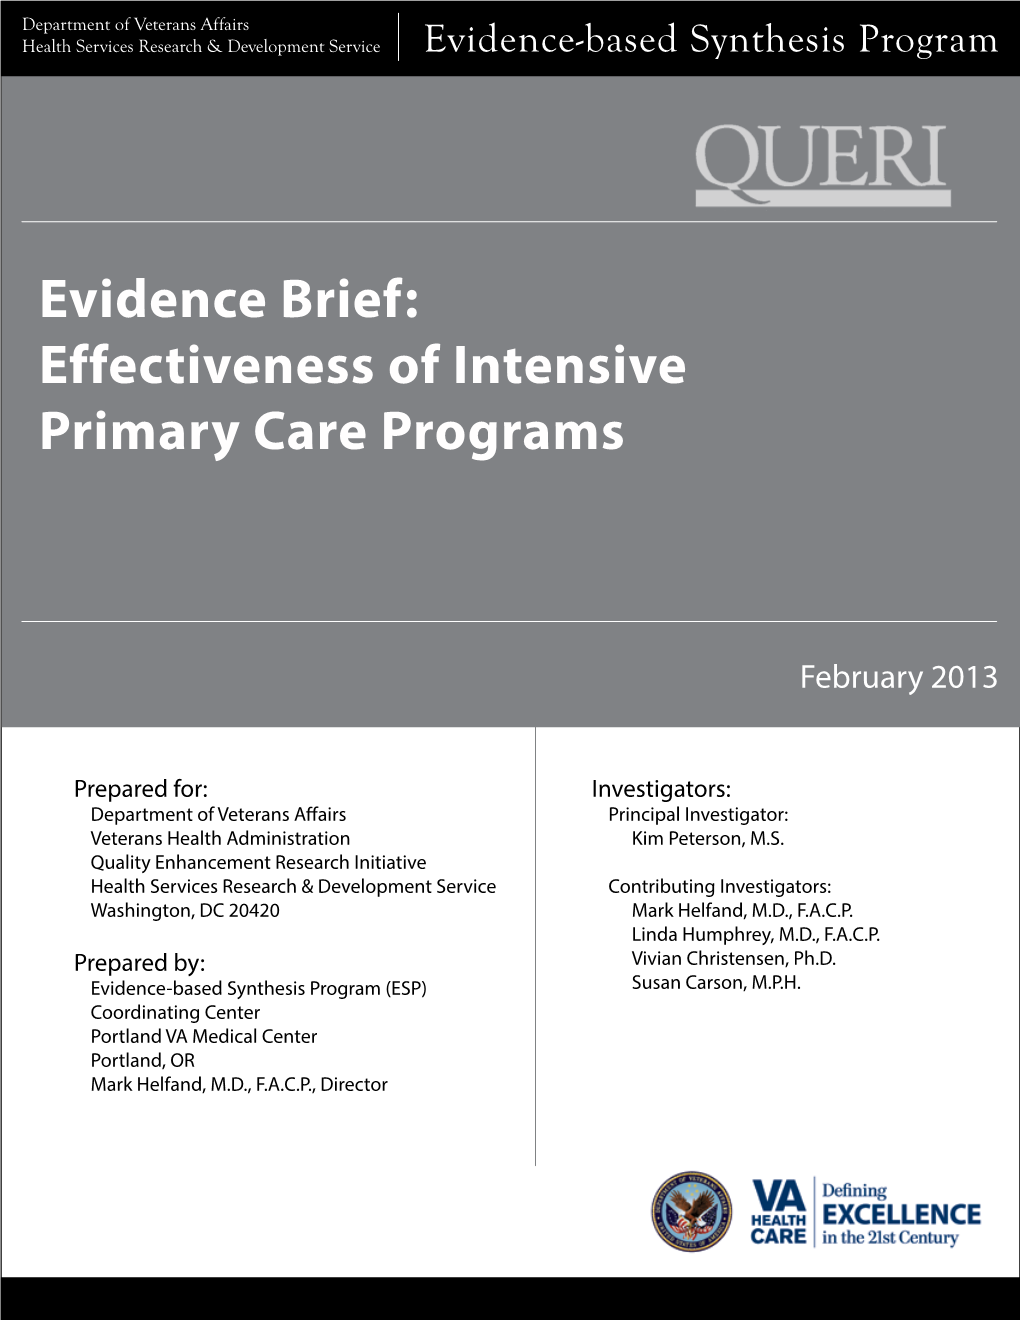 Evidence Brief: Effectiveness of Intensive Primary Care Programs